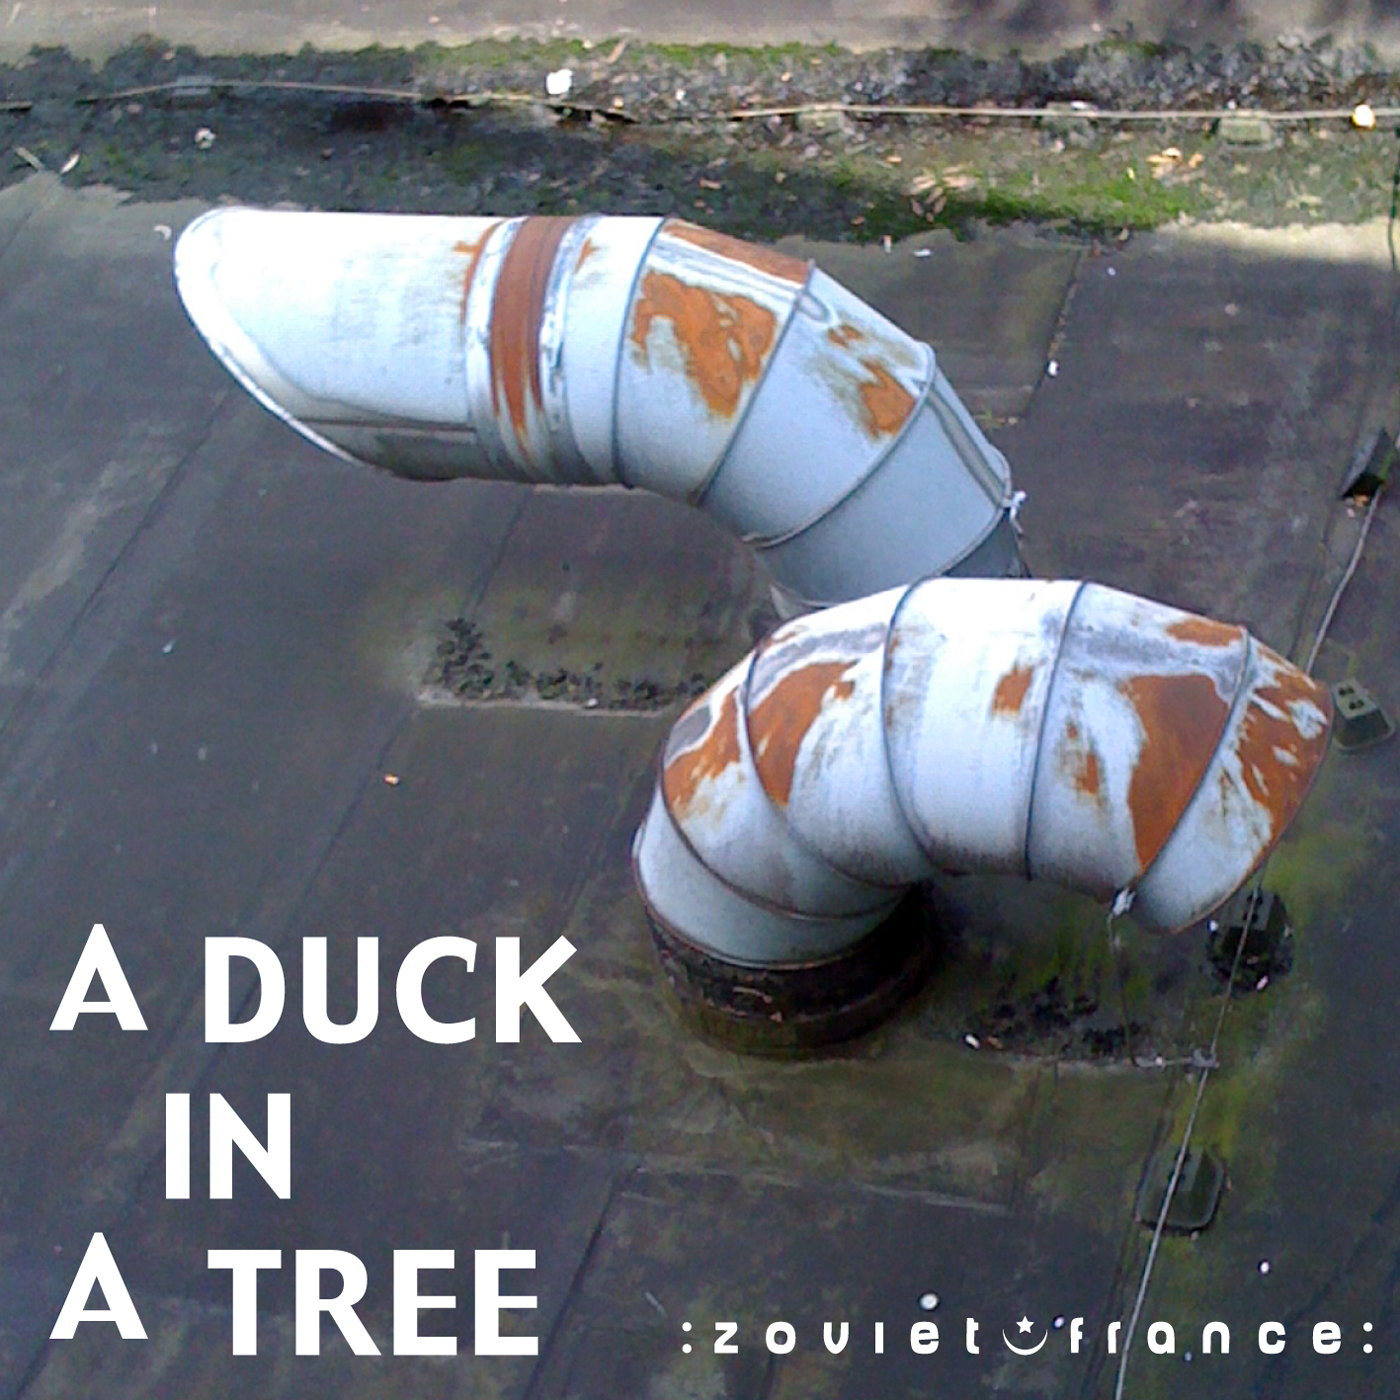 A-Duck-in-a-Tree-2012-08-11-_-Written-on-Seven-Leaves-with-a-Stalk-Dipped-in-Sap-_-layout-1400.jpg